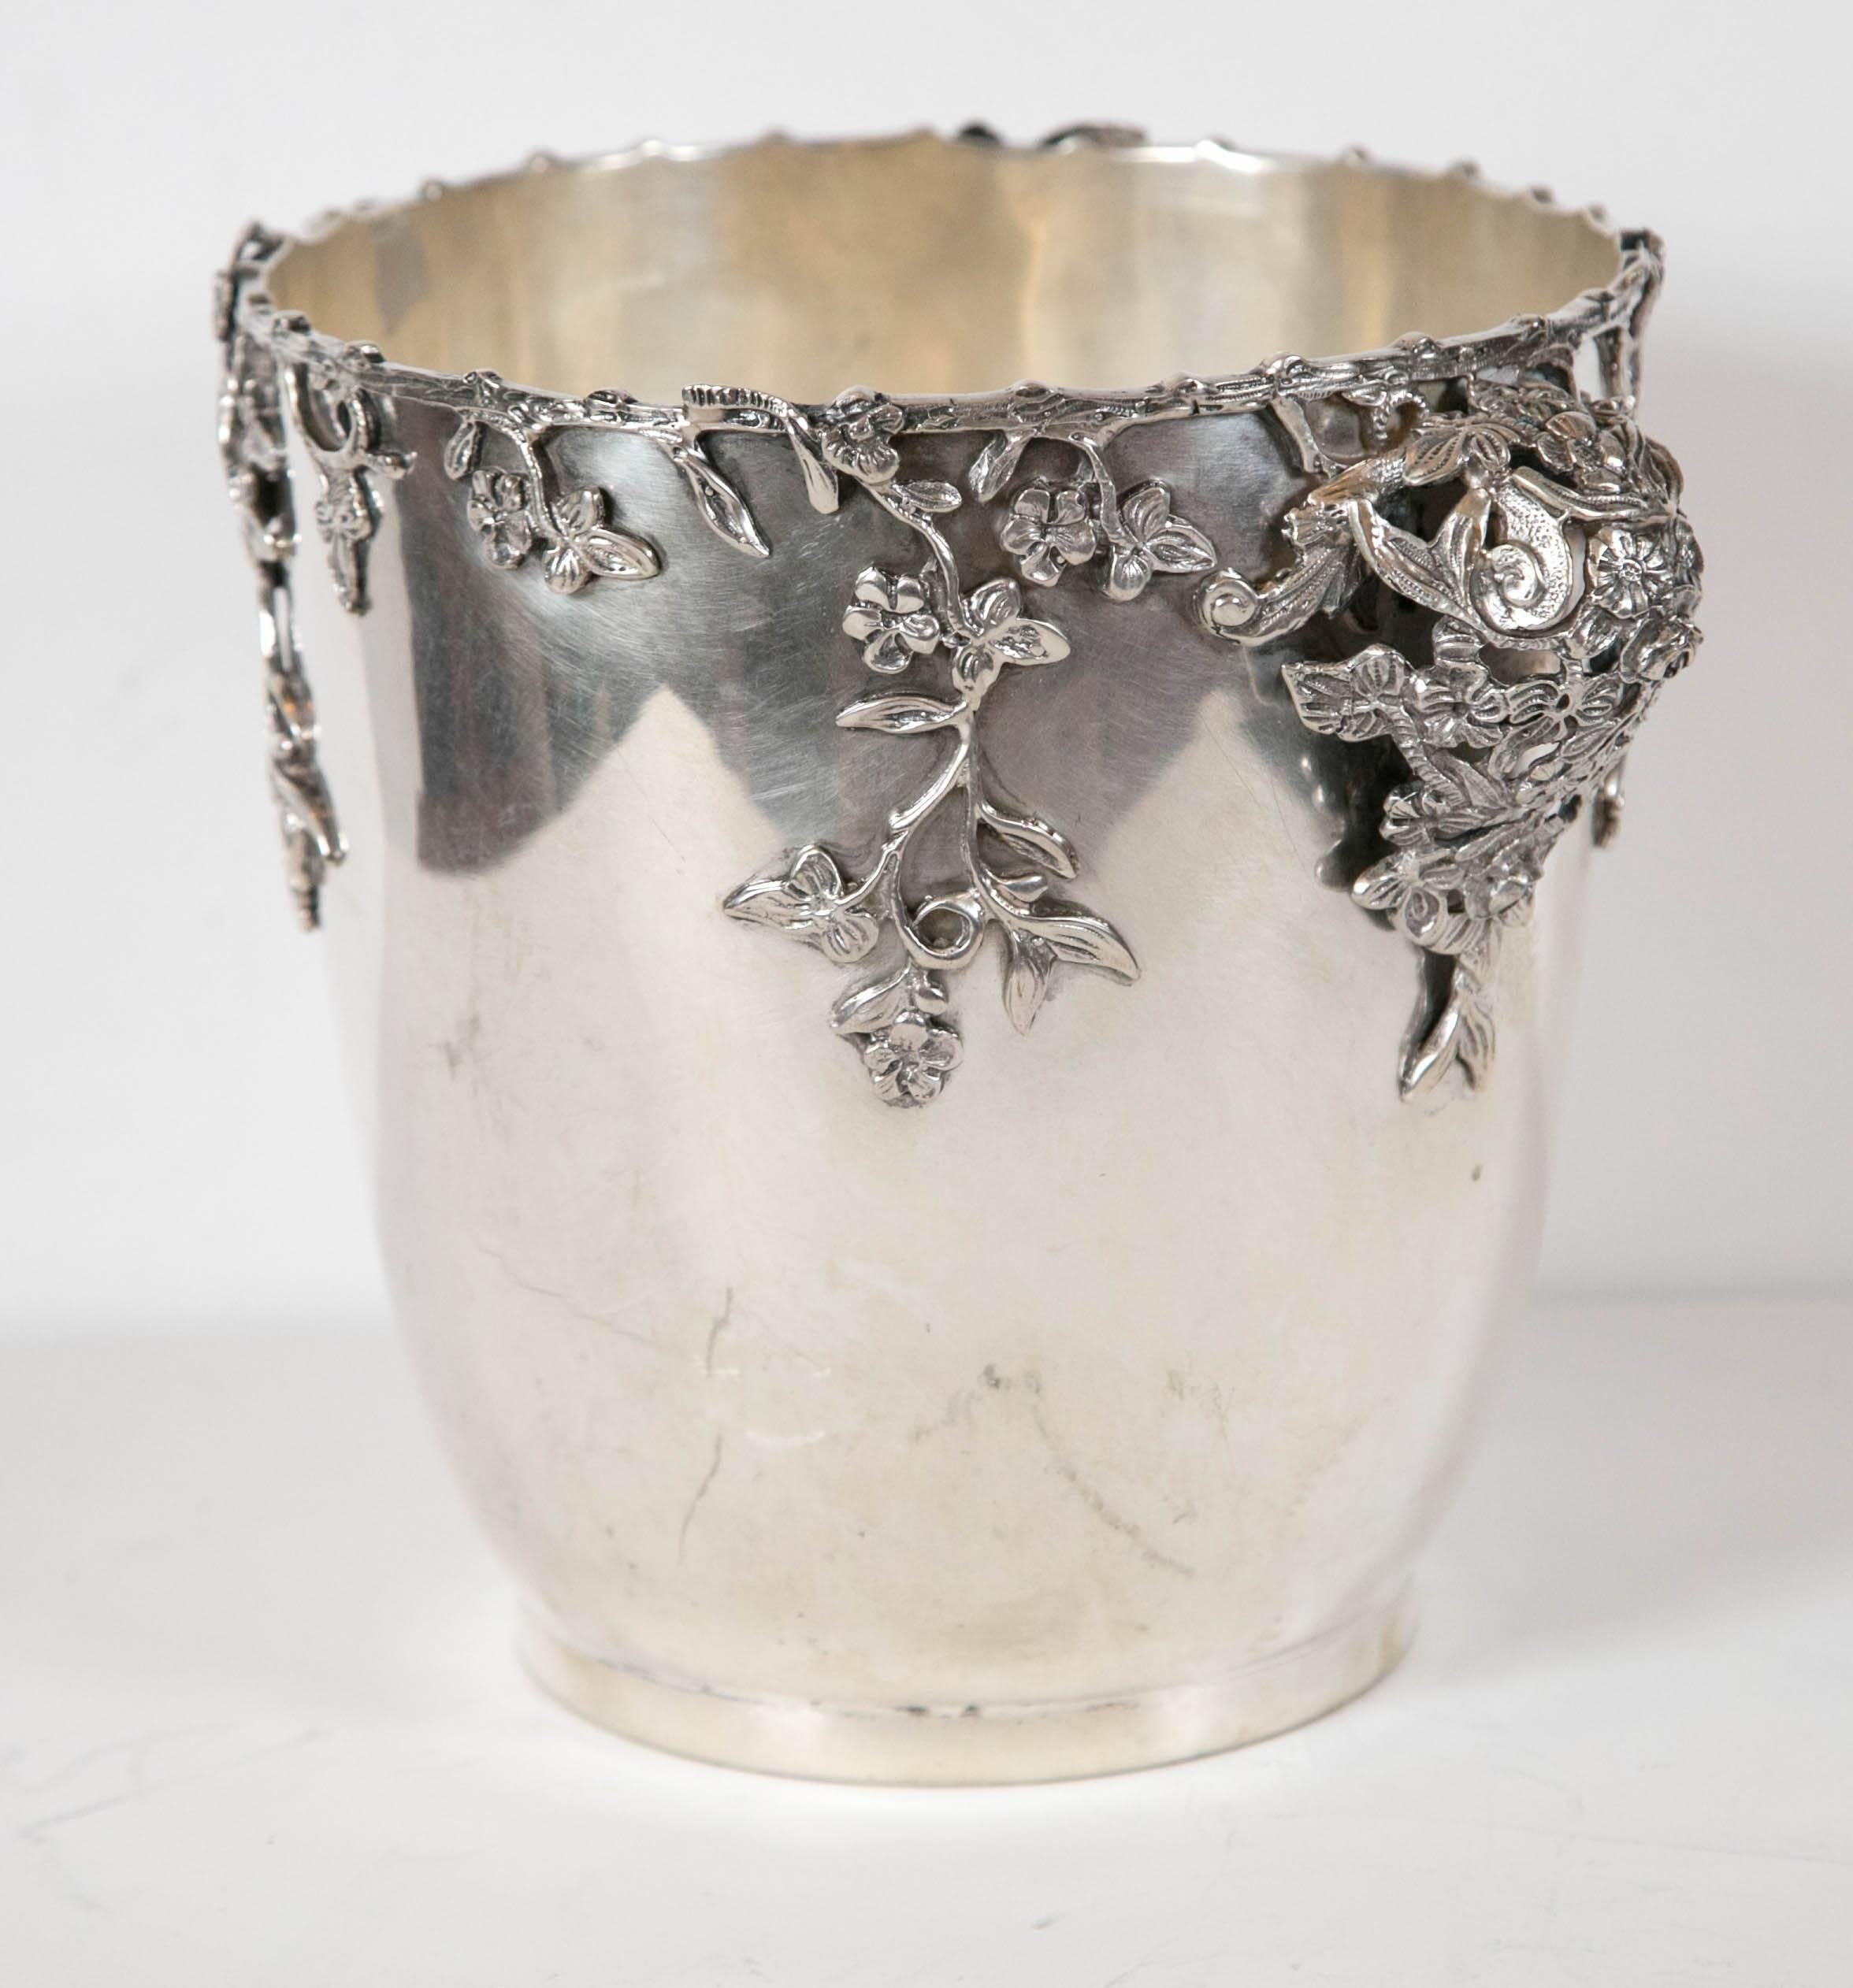 An Italian 800 silver wine cooler adorned with leaves and vines that lead to intricate handles made up of intertwining foliage and flowers. The bottom is marked Lavorazione a Mano (handmade).